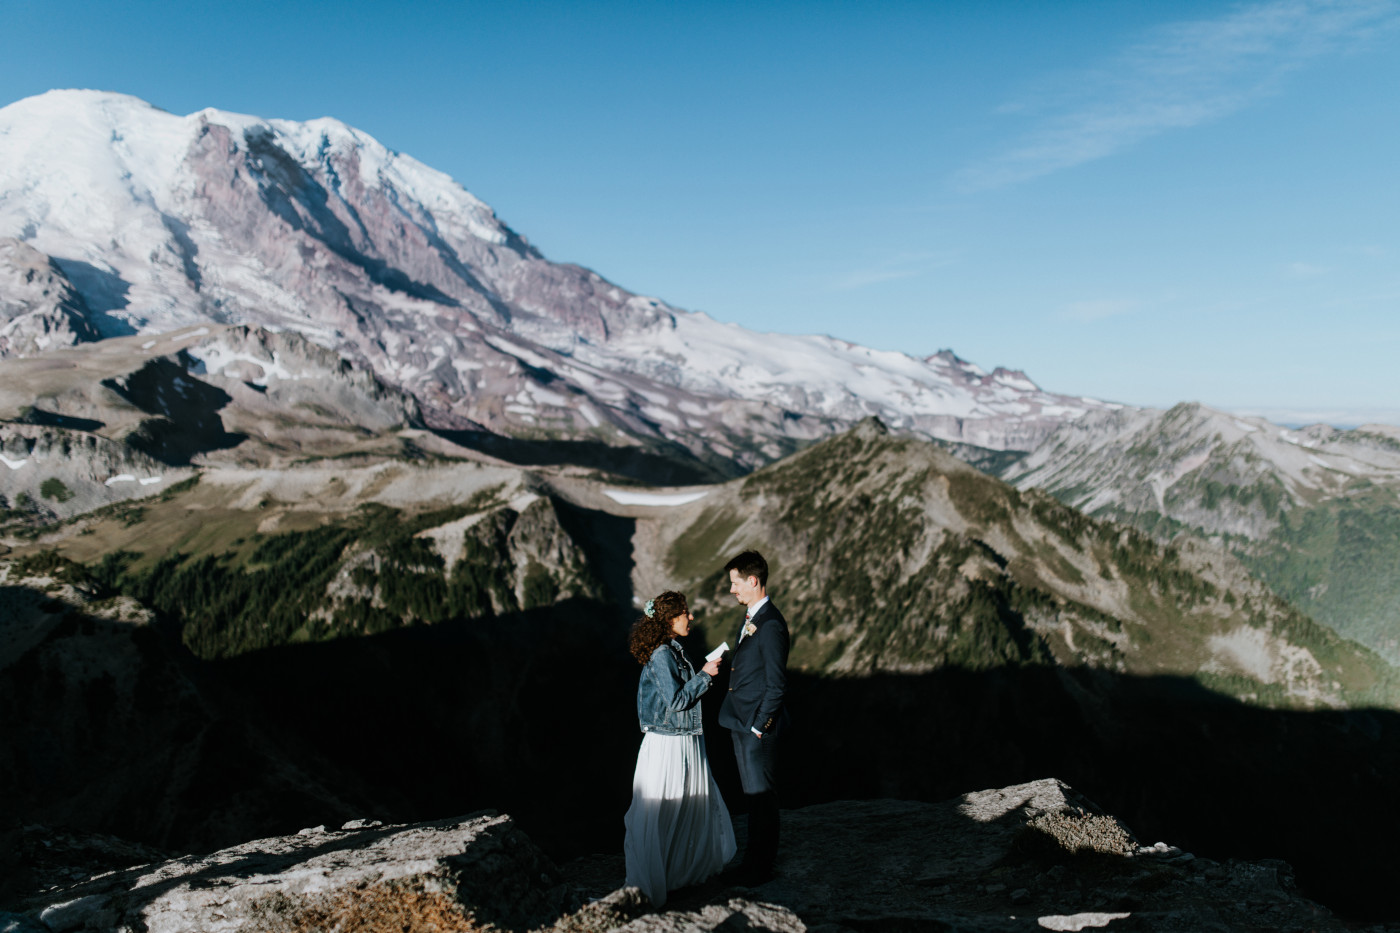 Chad and Tasha reciting vows at their elopement spot. Elopement photography at Mount Rainier by Sienna Plus Josh.